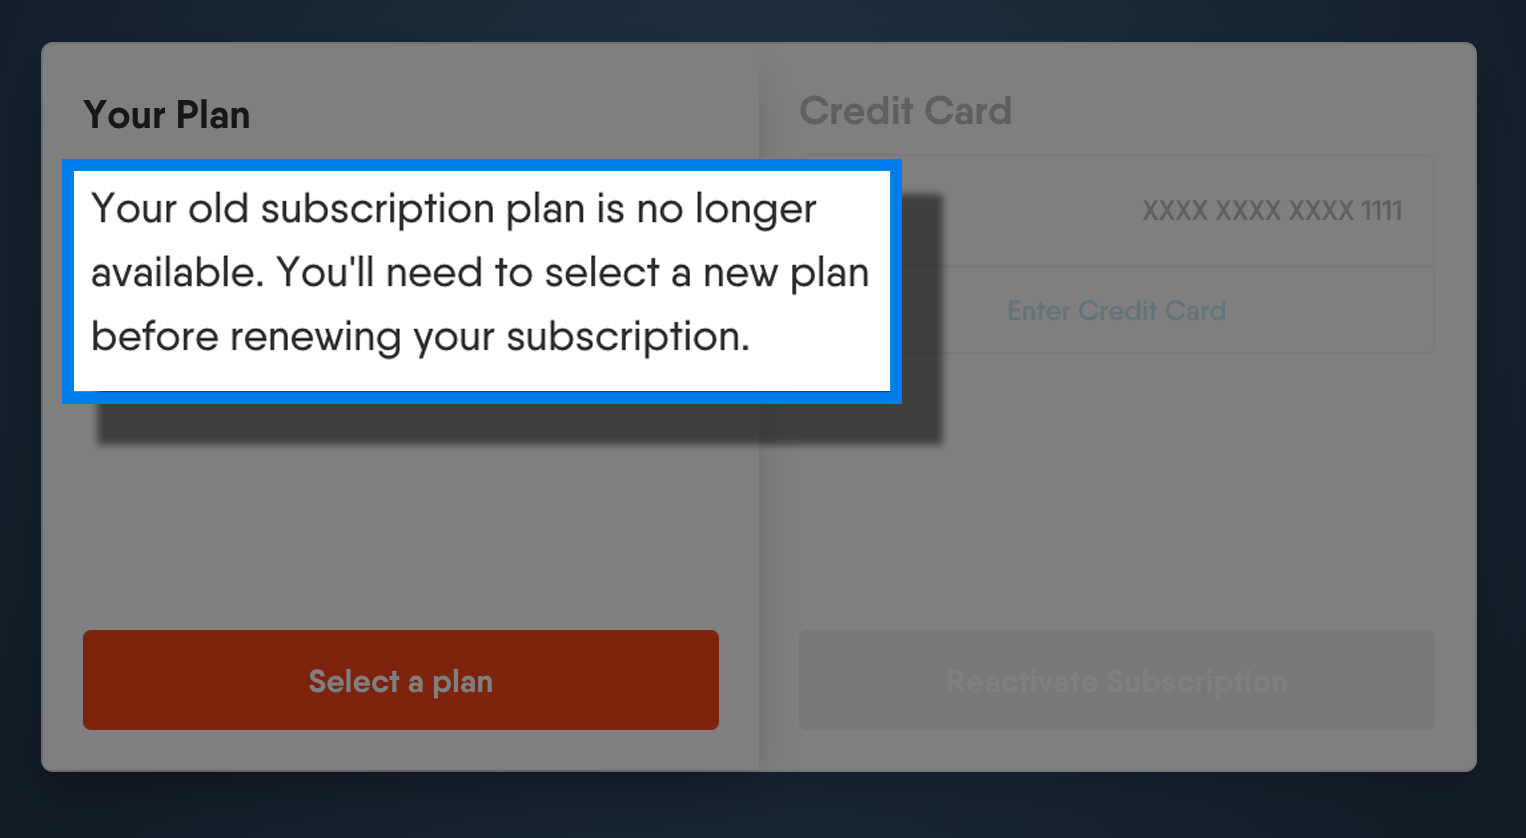 YOUR PLAN overview with a note that the previous plan is no longer available; select a new plan to continue